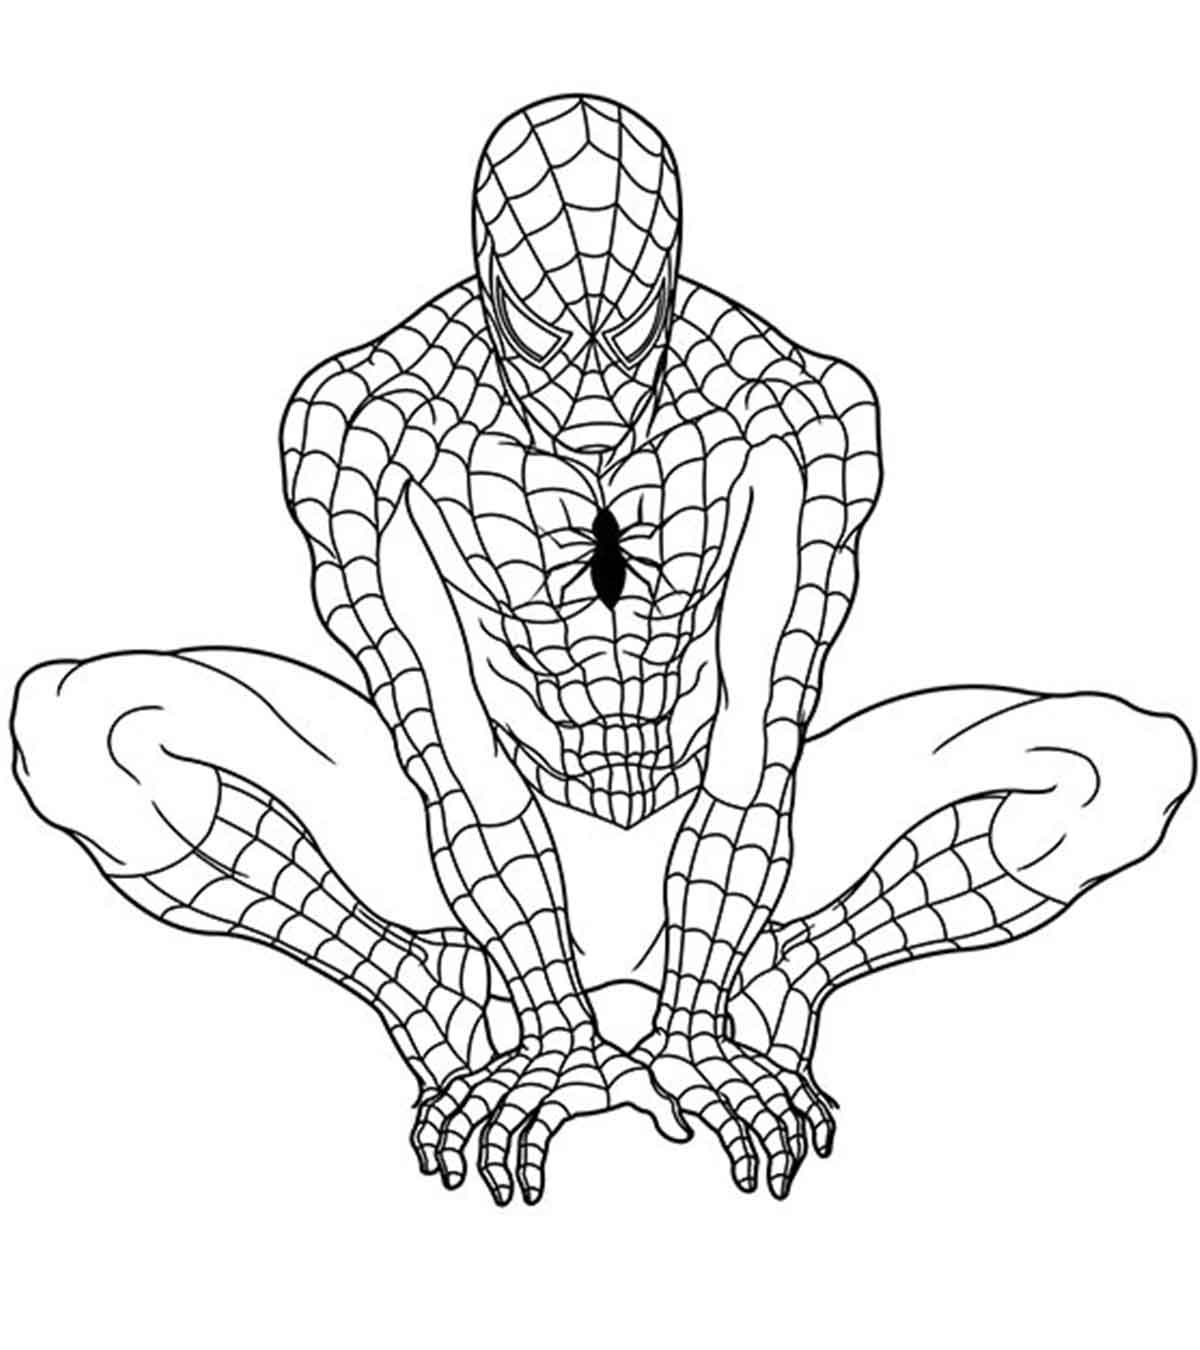 Super Hero Coloring Page Top 20 Free Printable Superhero Coloring Pages Online